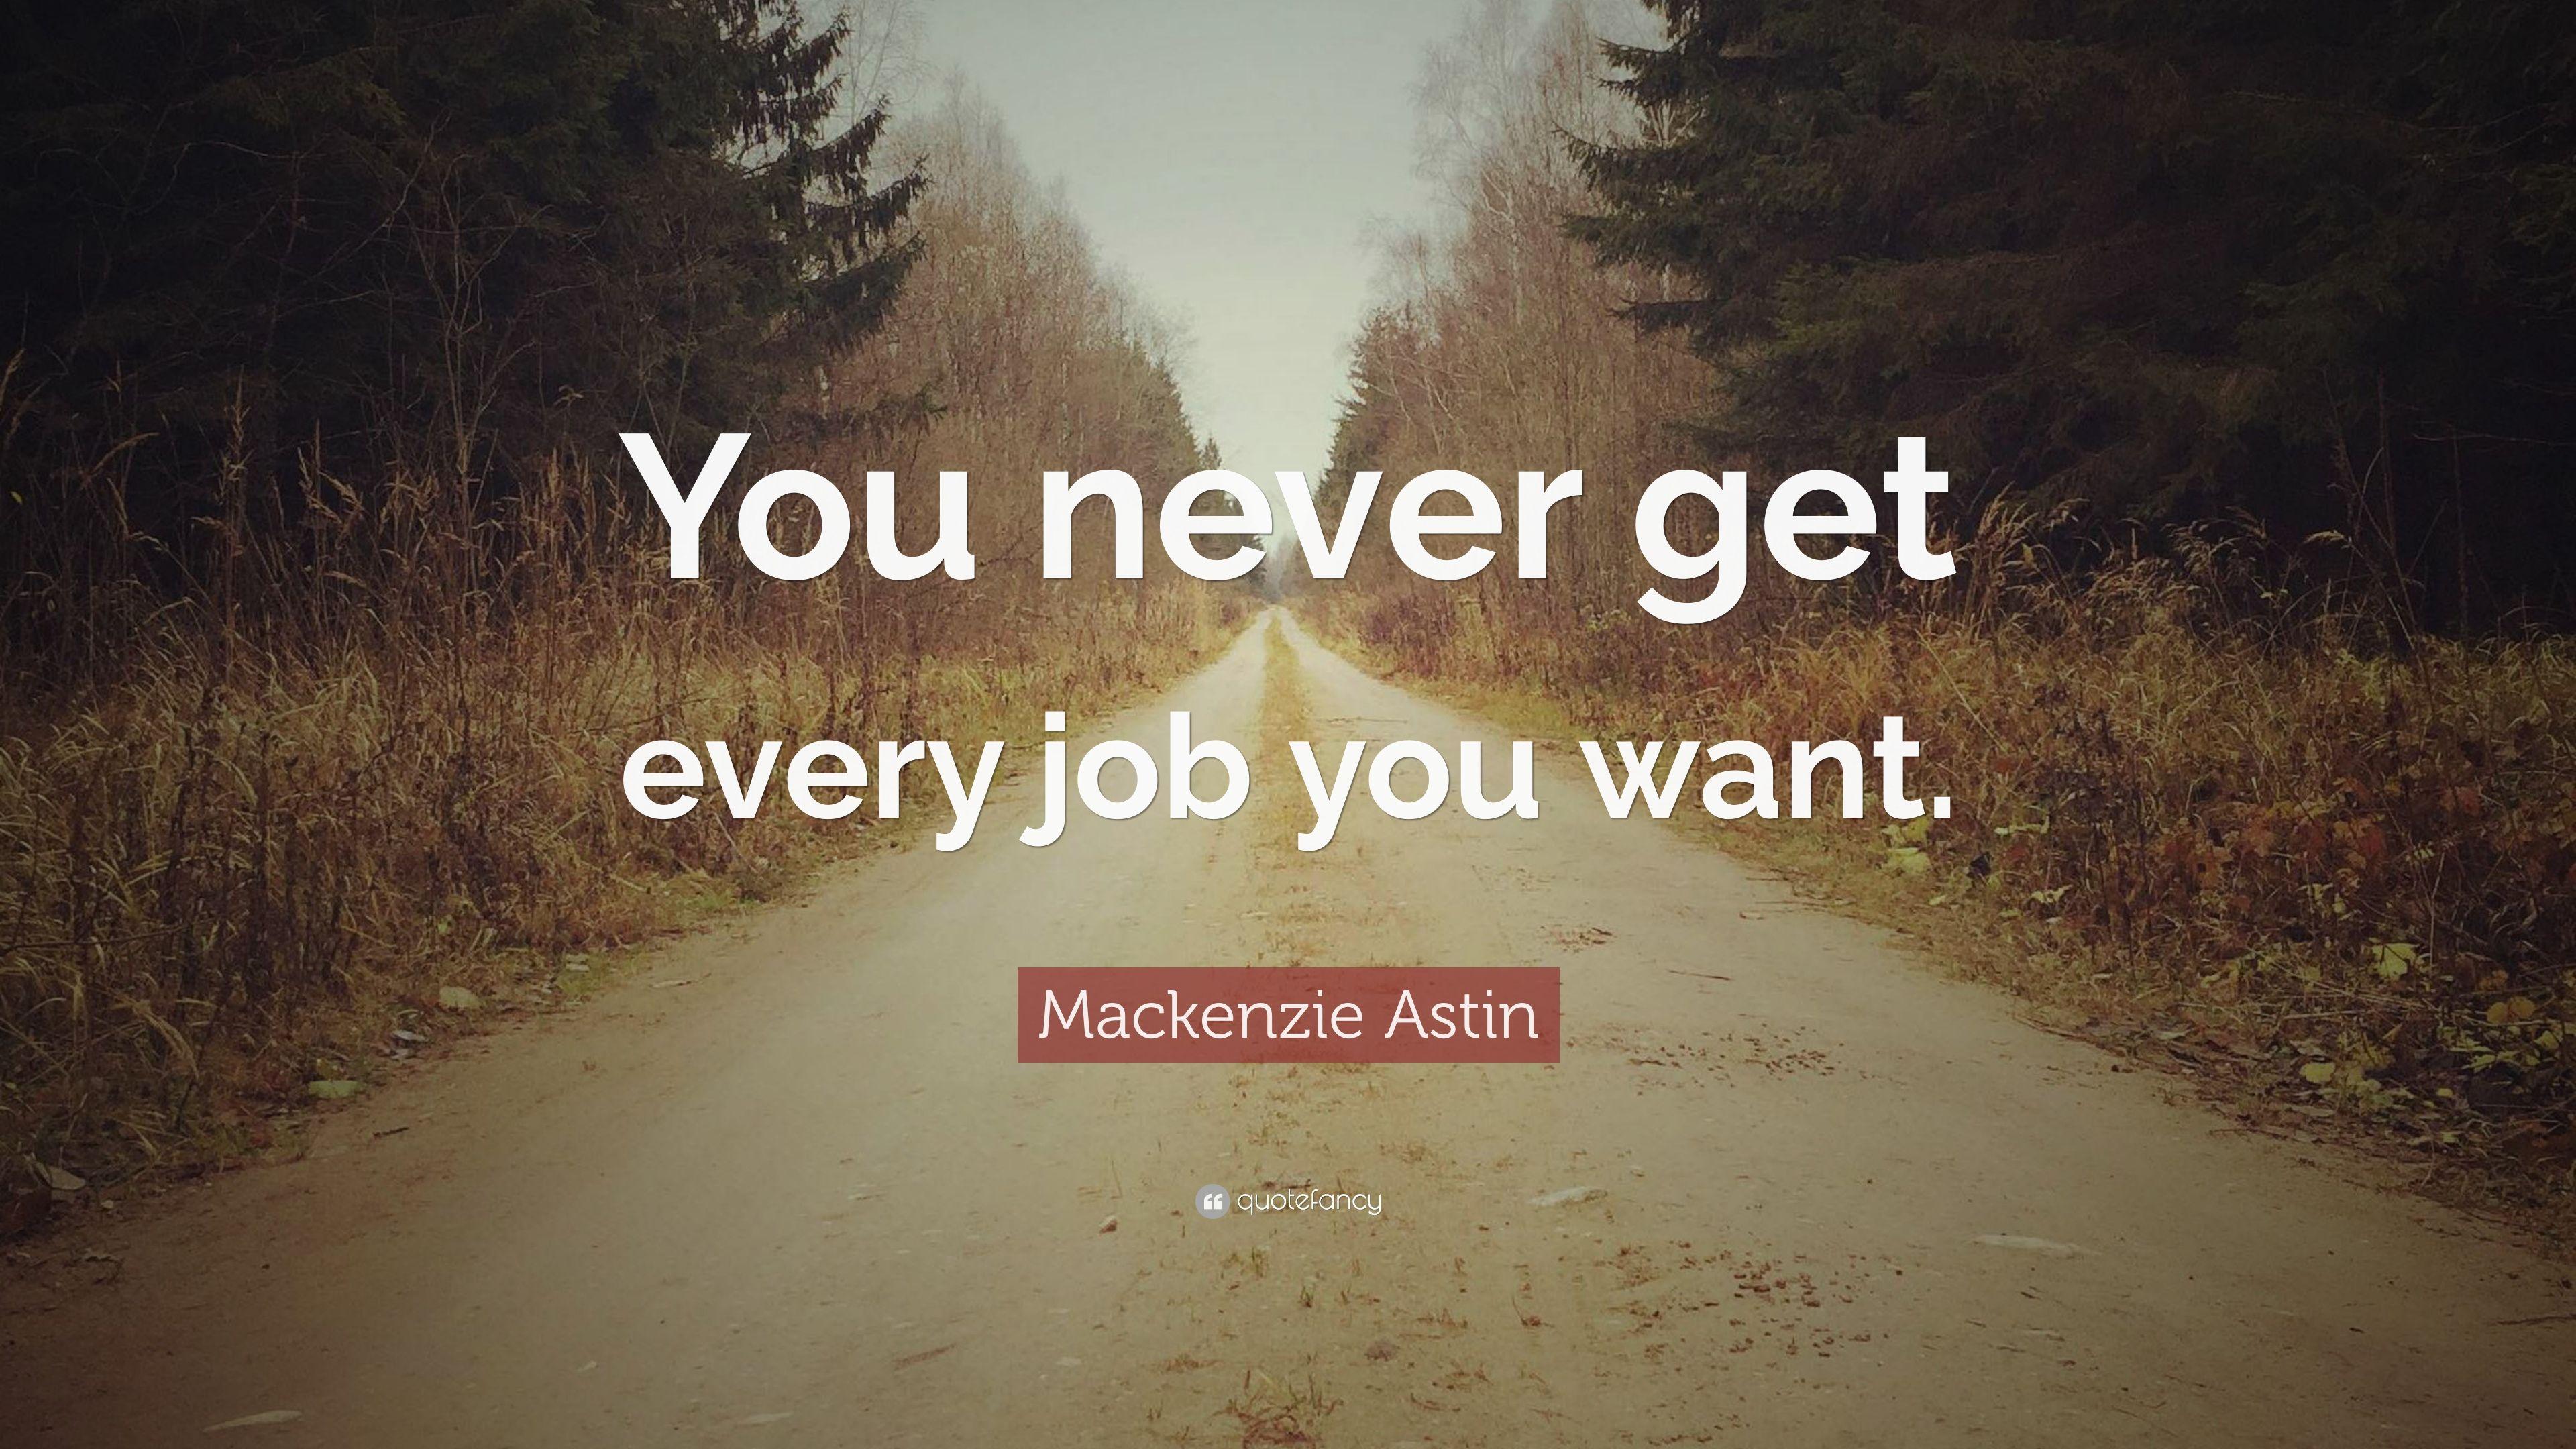 Mackenzie Astin Quote: “You never get every job you want.” 7